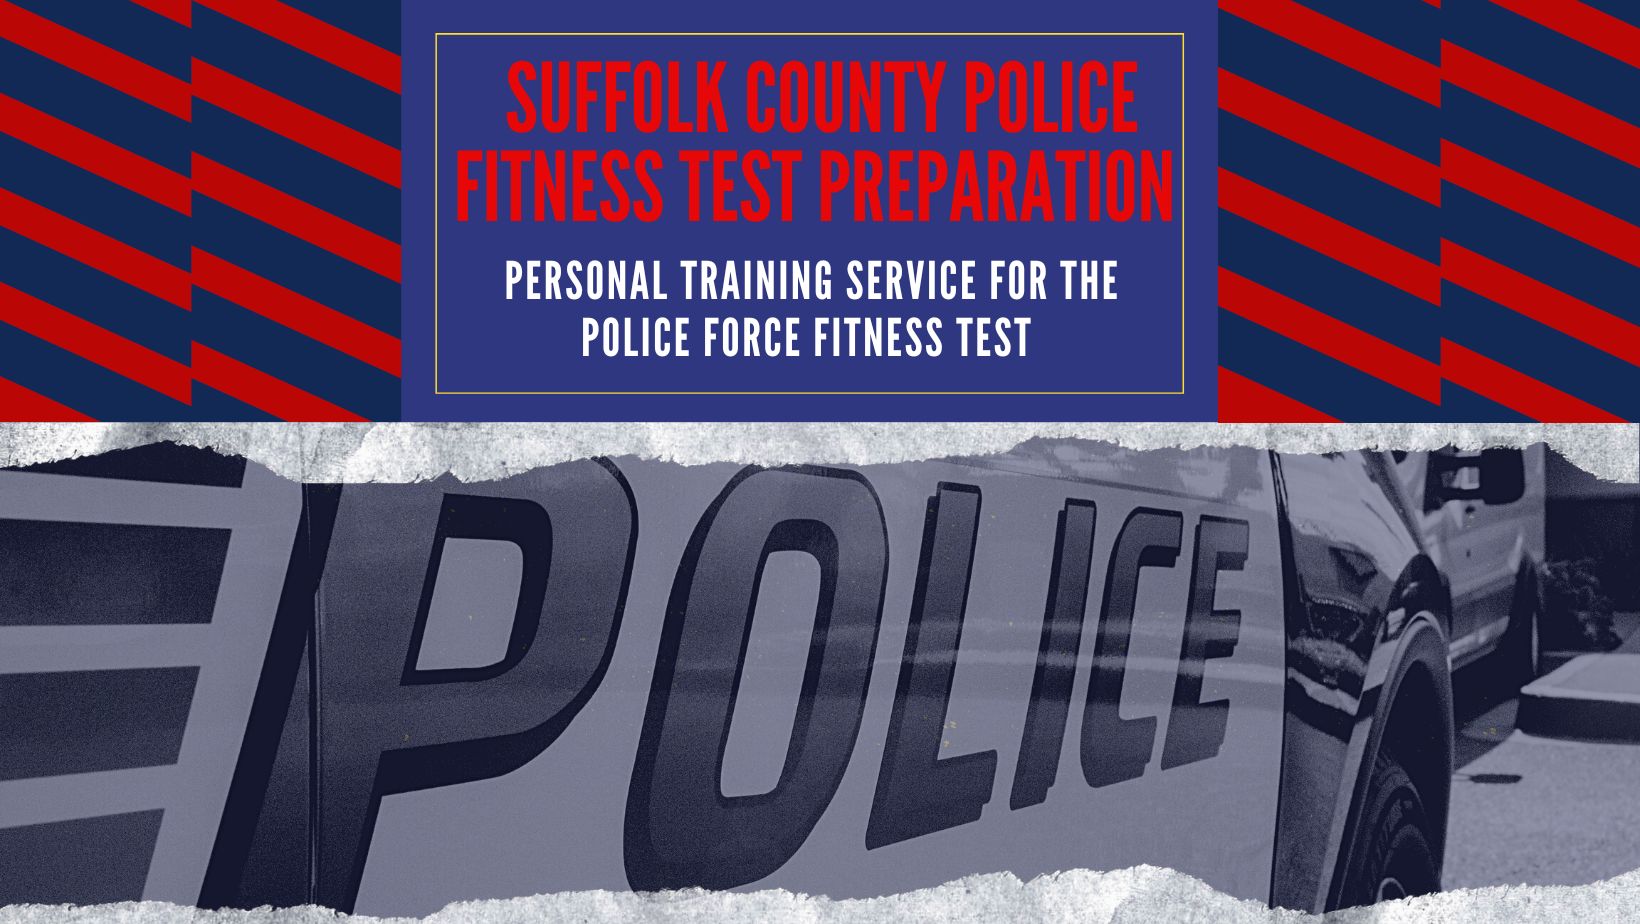 Suffolk County Police Fitness Test Preparation | Long Island